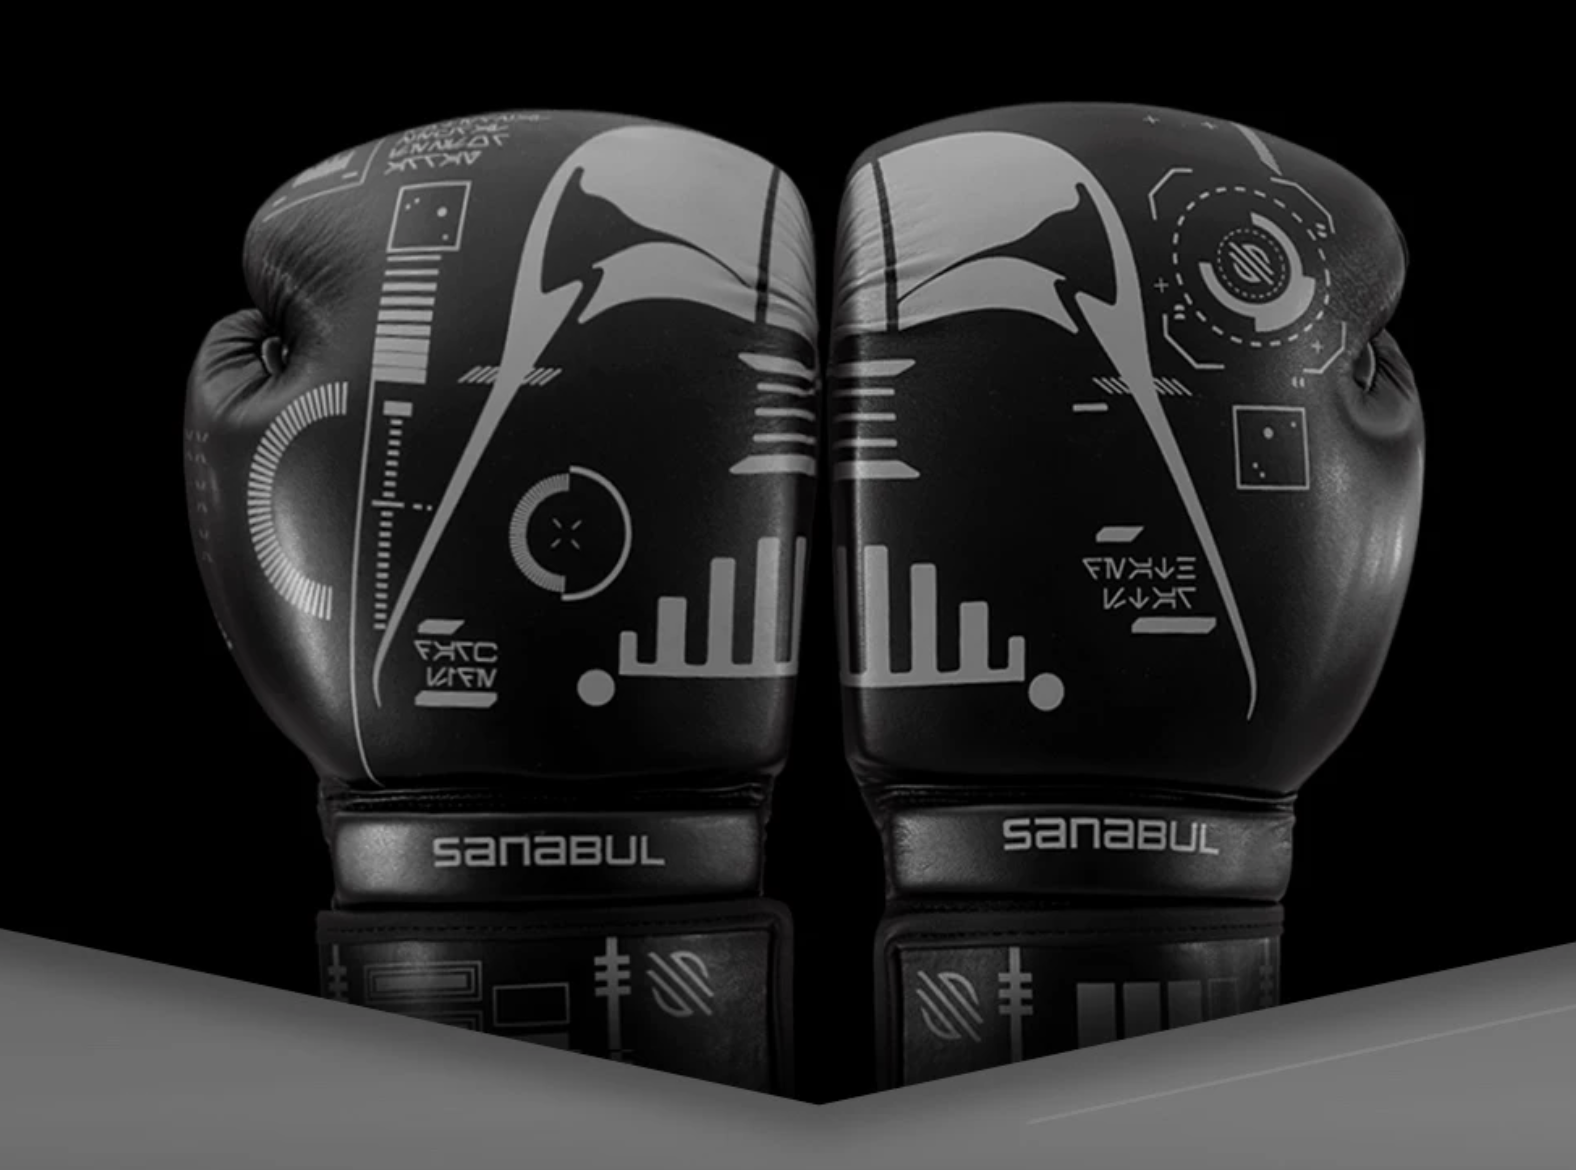 a pair of black boxing gloves with a darth vader design on them in grey